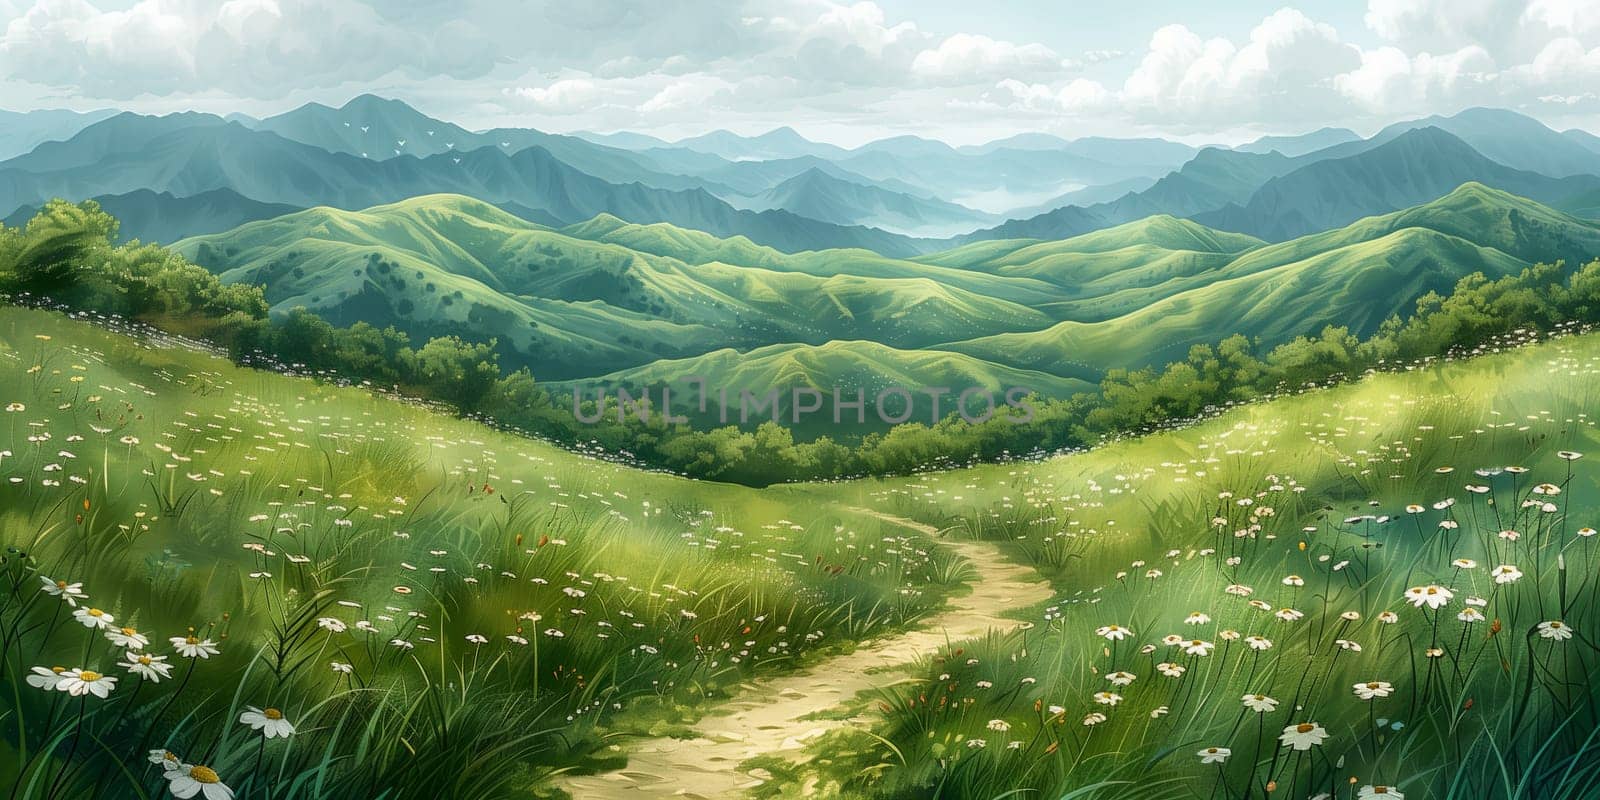 A terrestrial plantlined dirt path winds through a lush grassland with majestic mountains in the backdrop under a serene sky filled with fluffy clouds